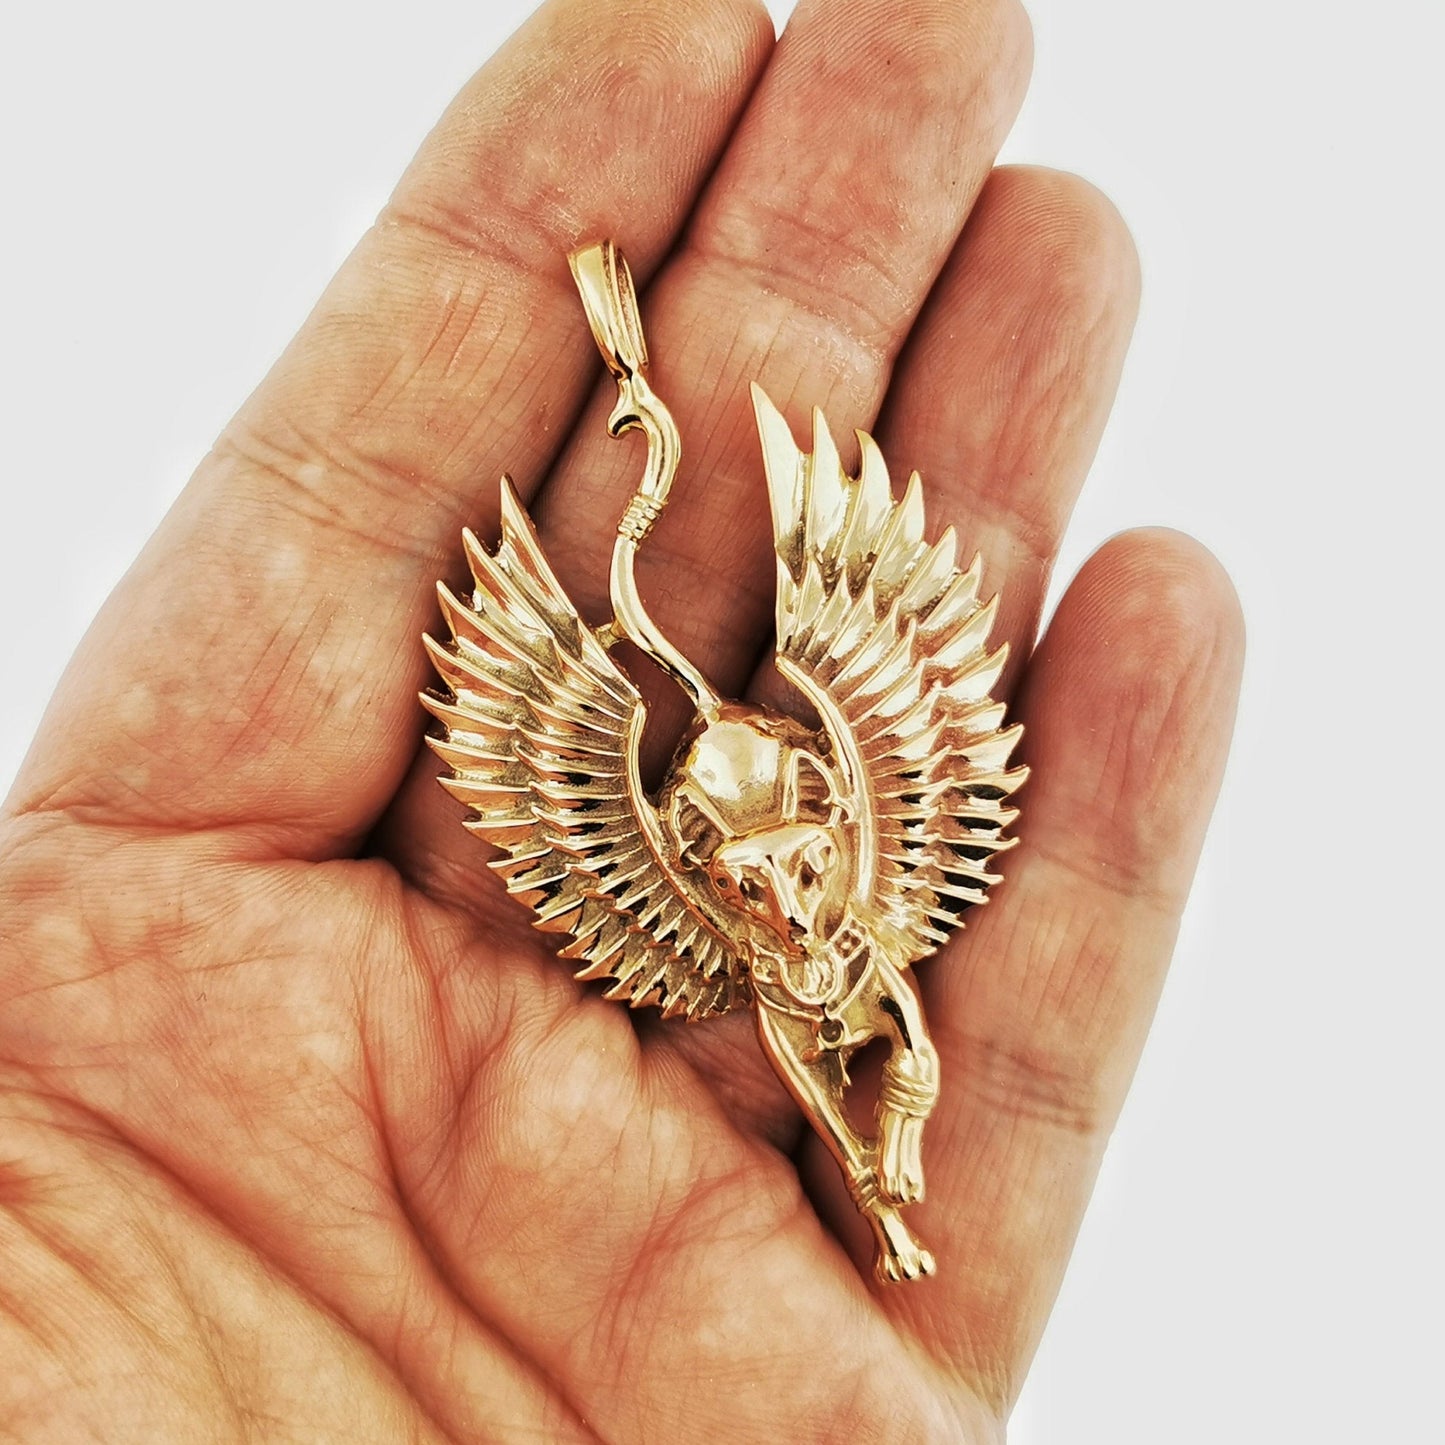 Winged Bastet Pendant in Sterling Silver or Antique Bronze, Egyptian Goddess Pendant, Winged Cat Pendant, Egyptian Cat Pendant, Bronze Cat Pendant,  Bronze Egyptian Cat Necklace, Bastet Cat Pendant, Bast Egyptian Goddess, Antique Bronze Bastet